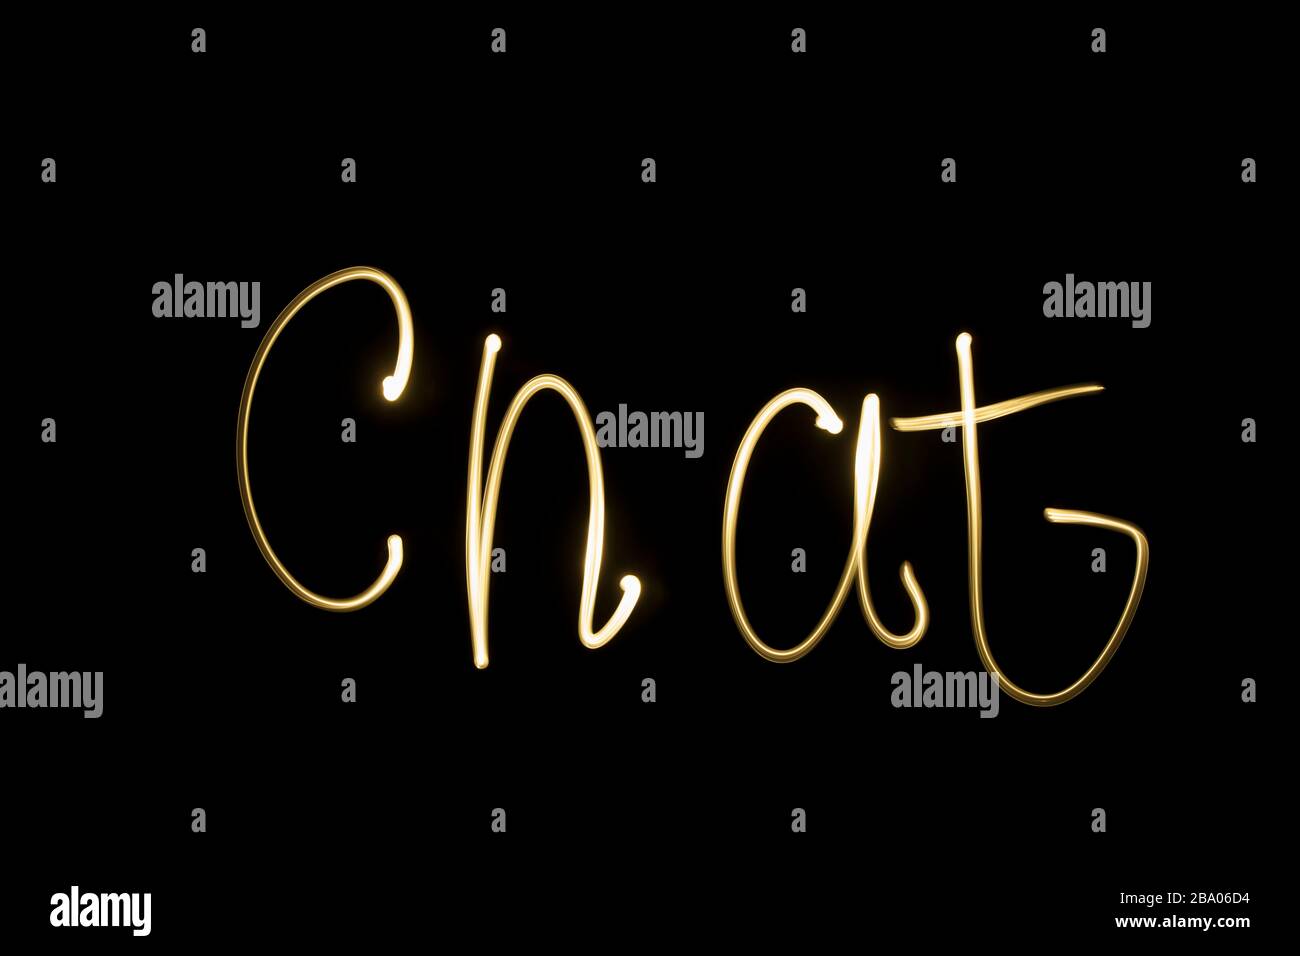 Chat message written with light torch Stock Photo